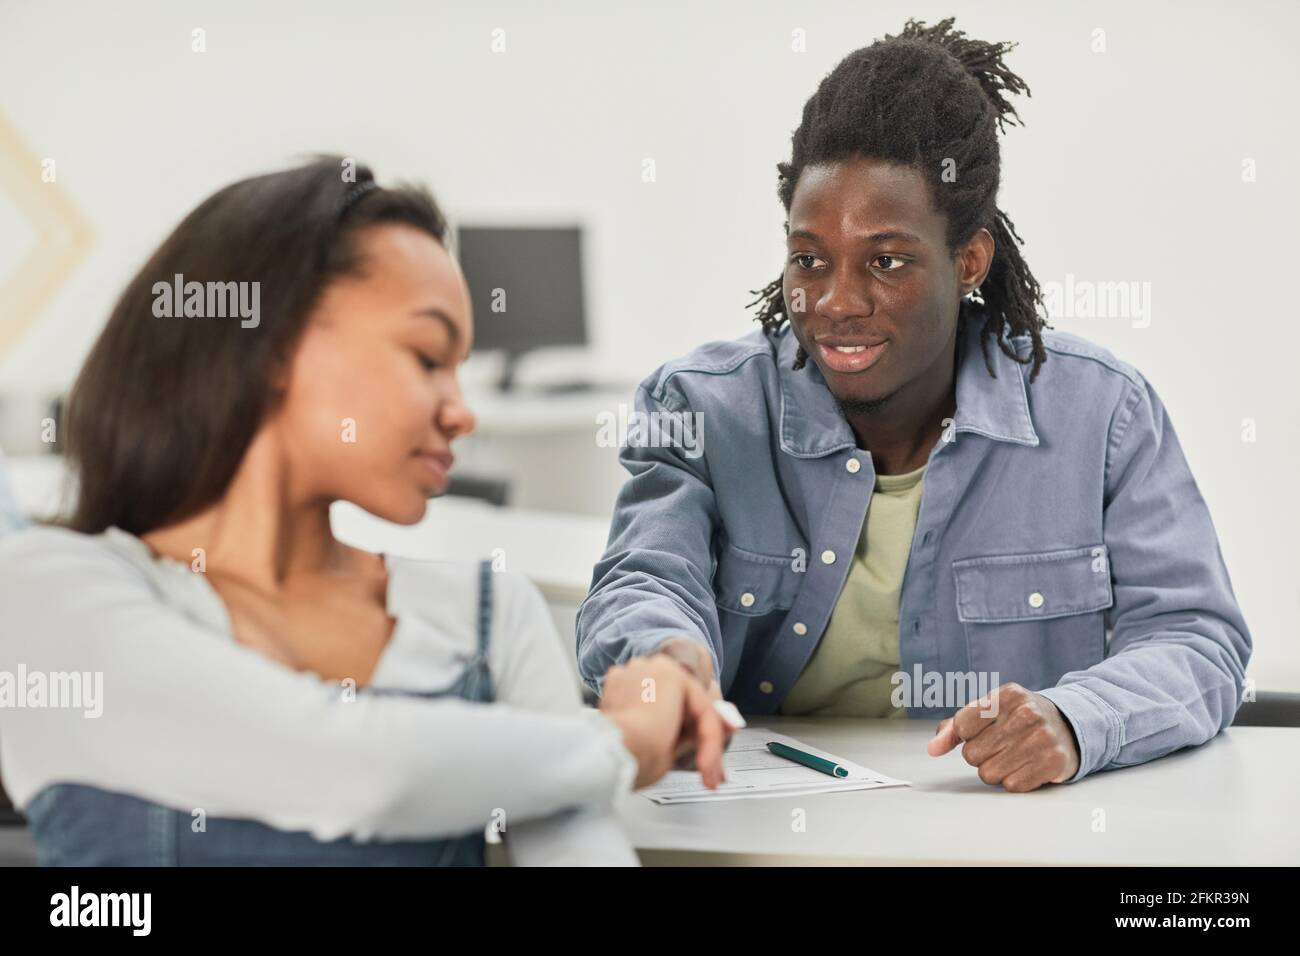 Portrait of two African-American students passing notes during class in school, copy space Stock Photo